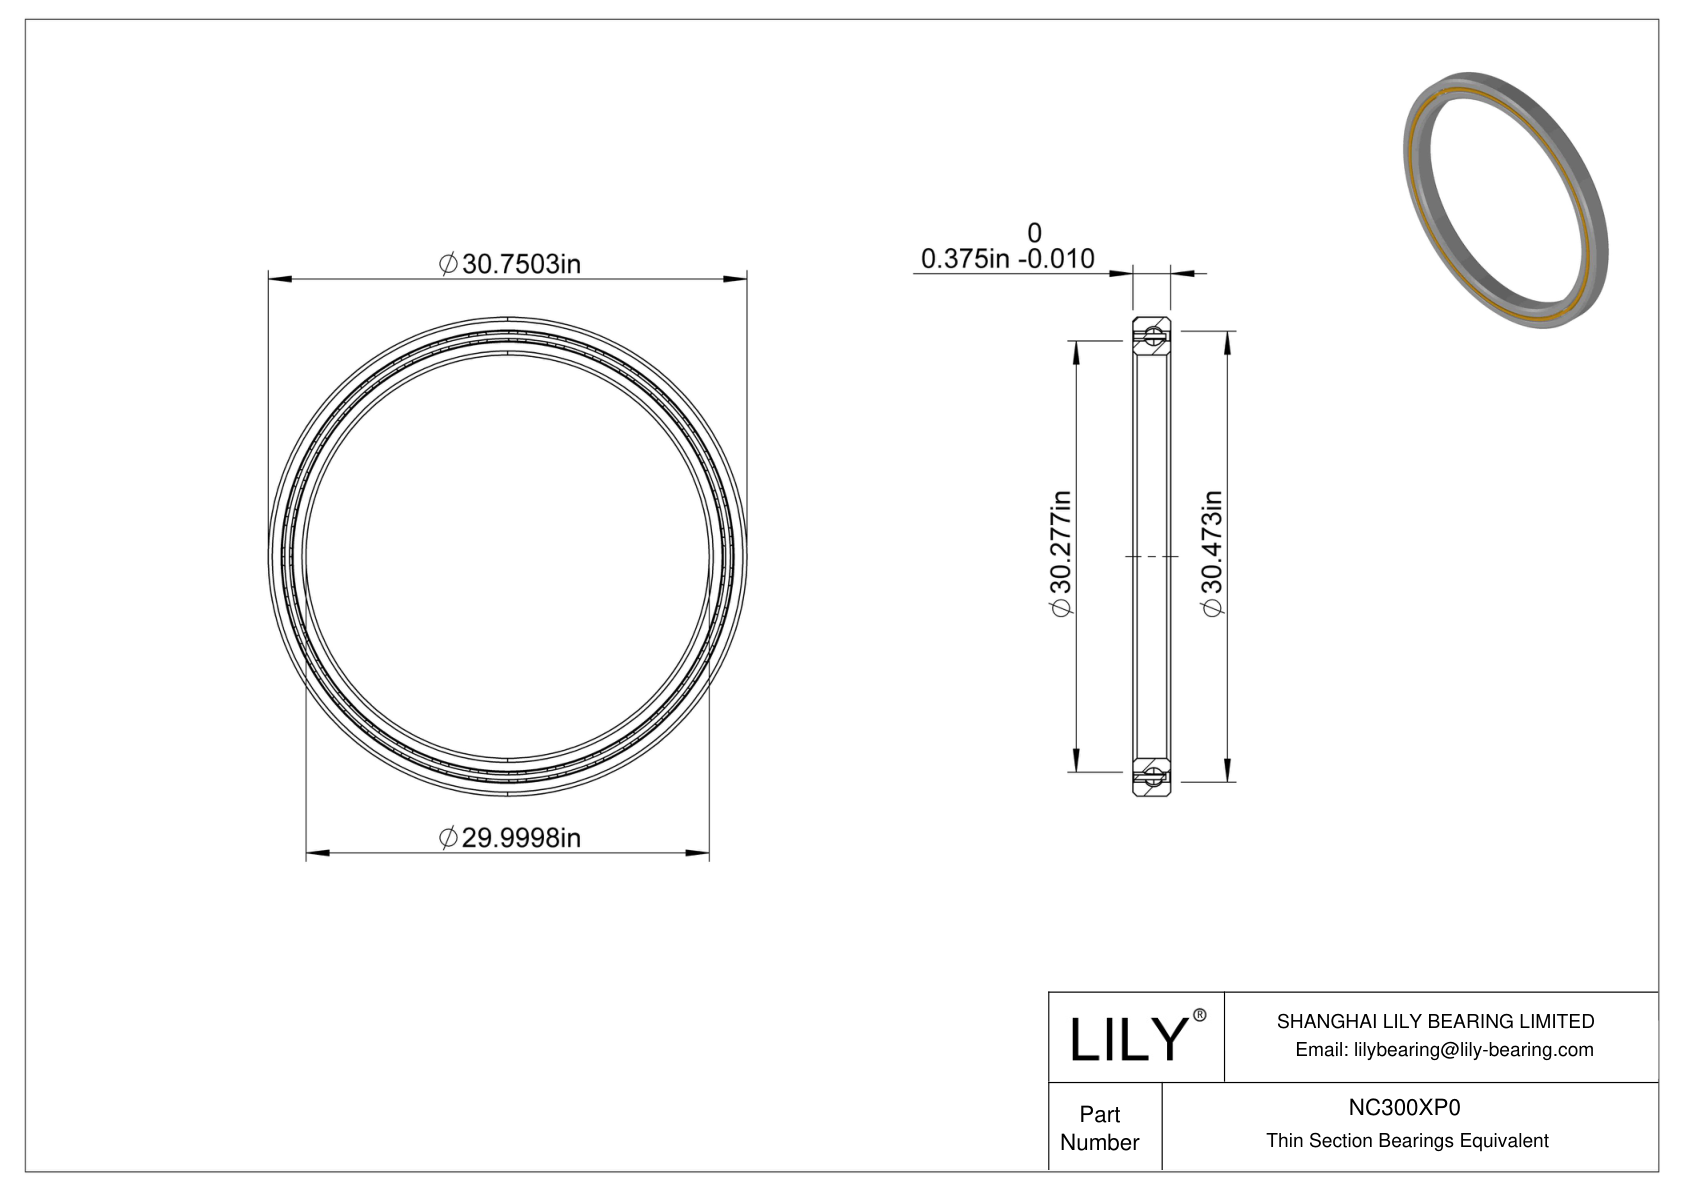 NC300XP0 Constant Section (CS) Bearings cad drawing